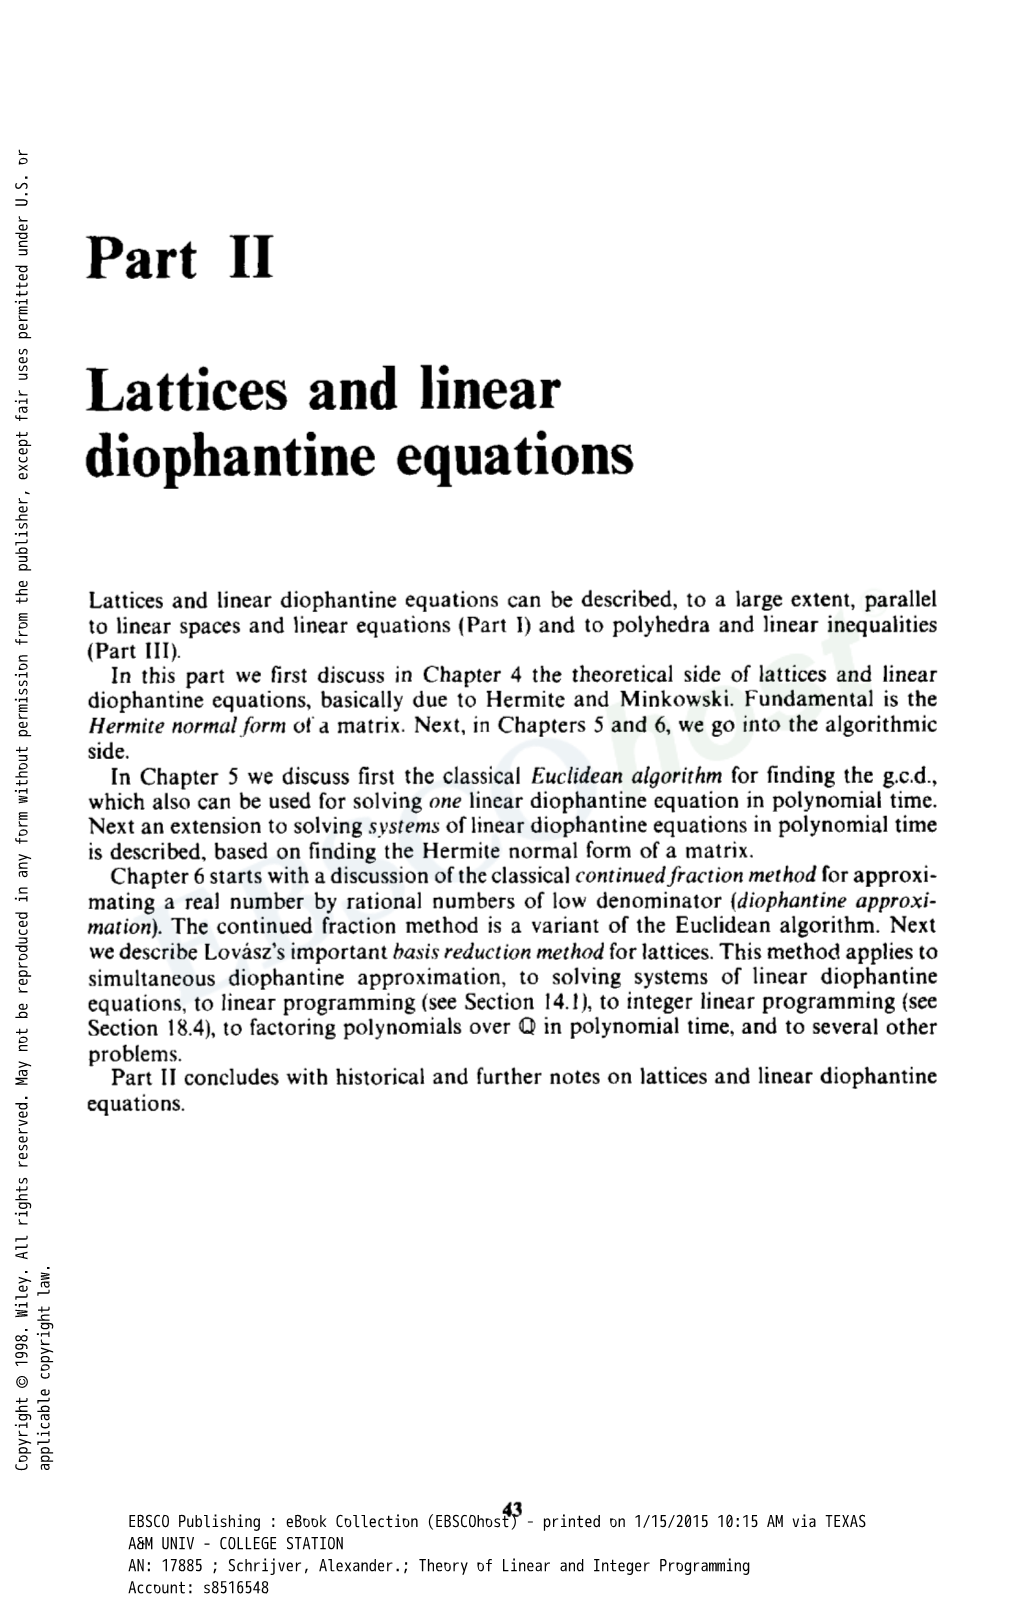 Part I1 Lattices and Linear Diophantine Equations